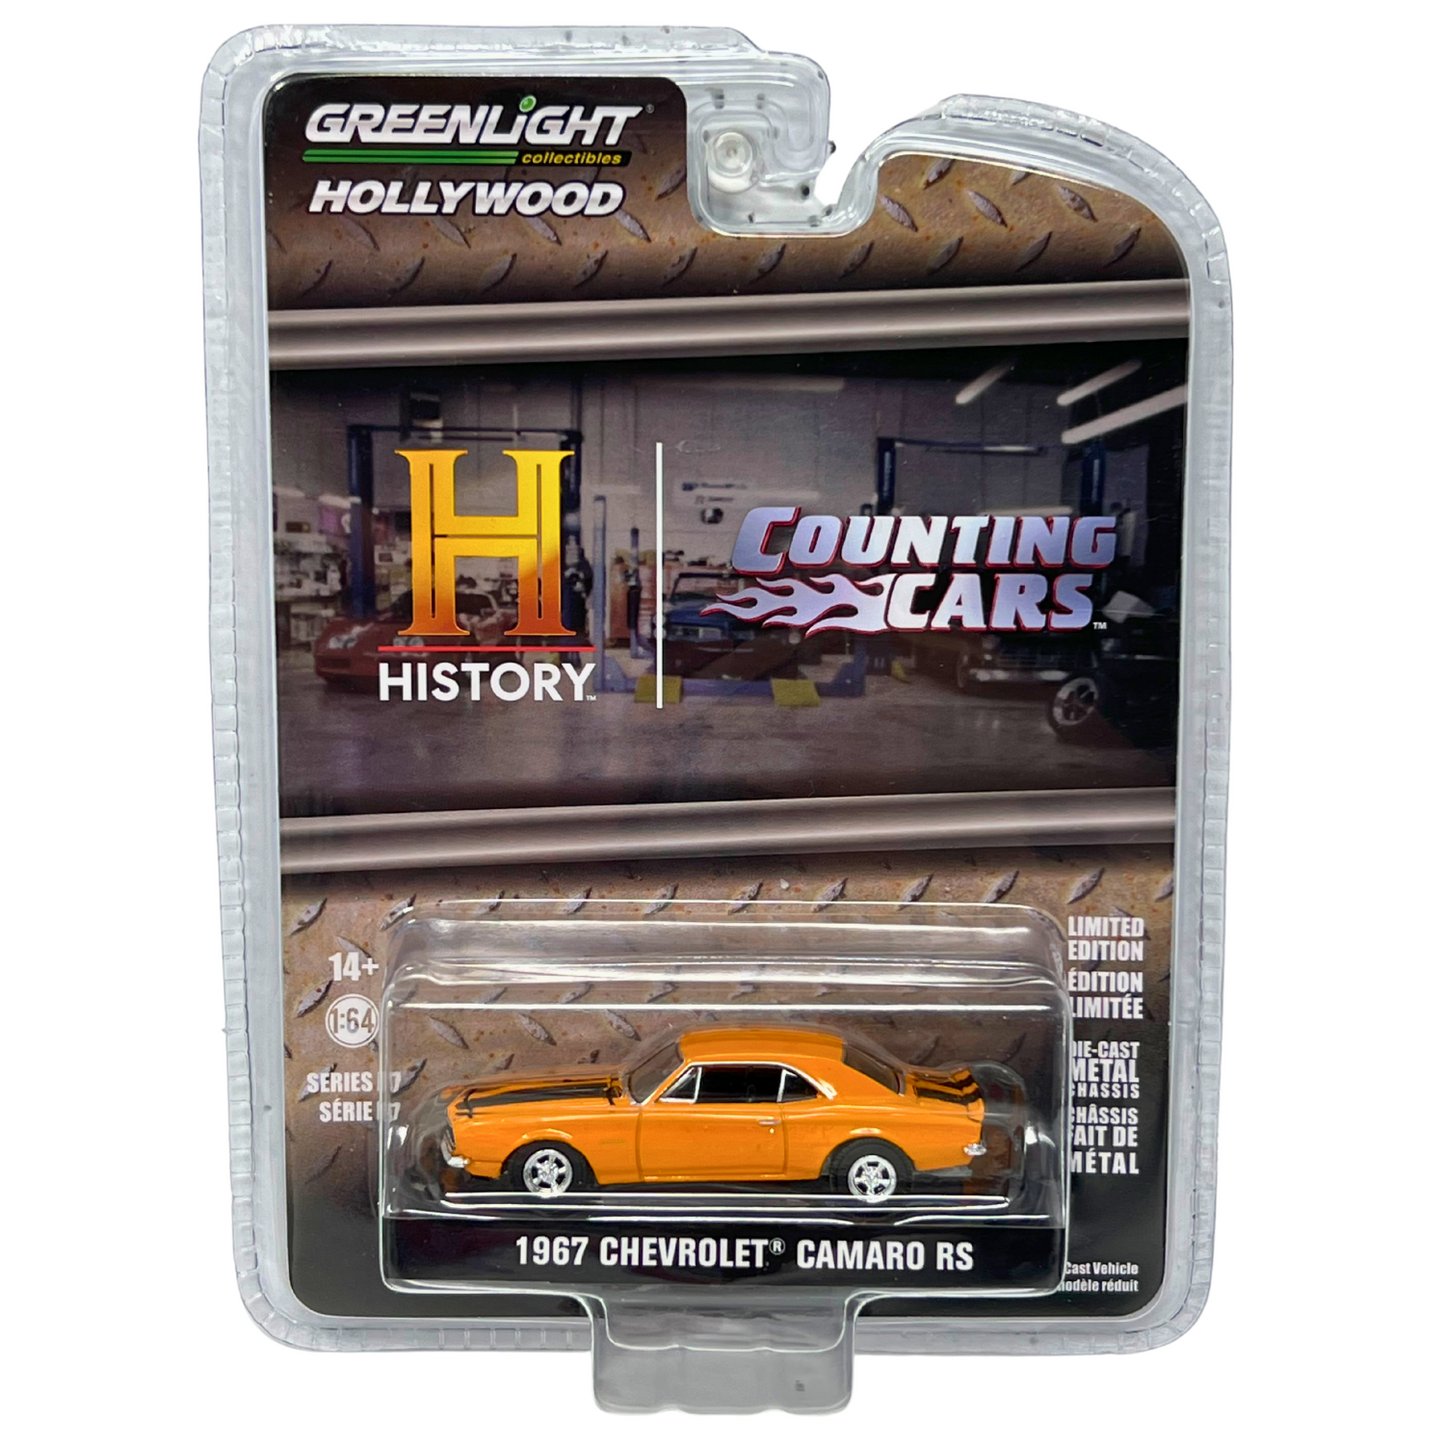 Greenlight Hollywood History Counting Cars 1967 Chevrolet Camaro RS 1:64 Diecast